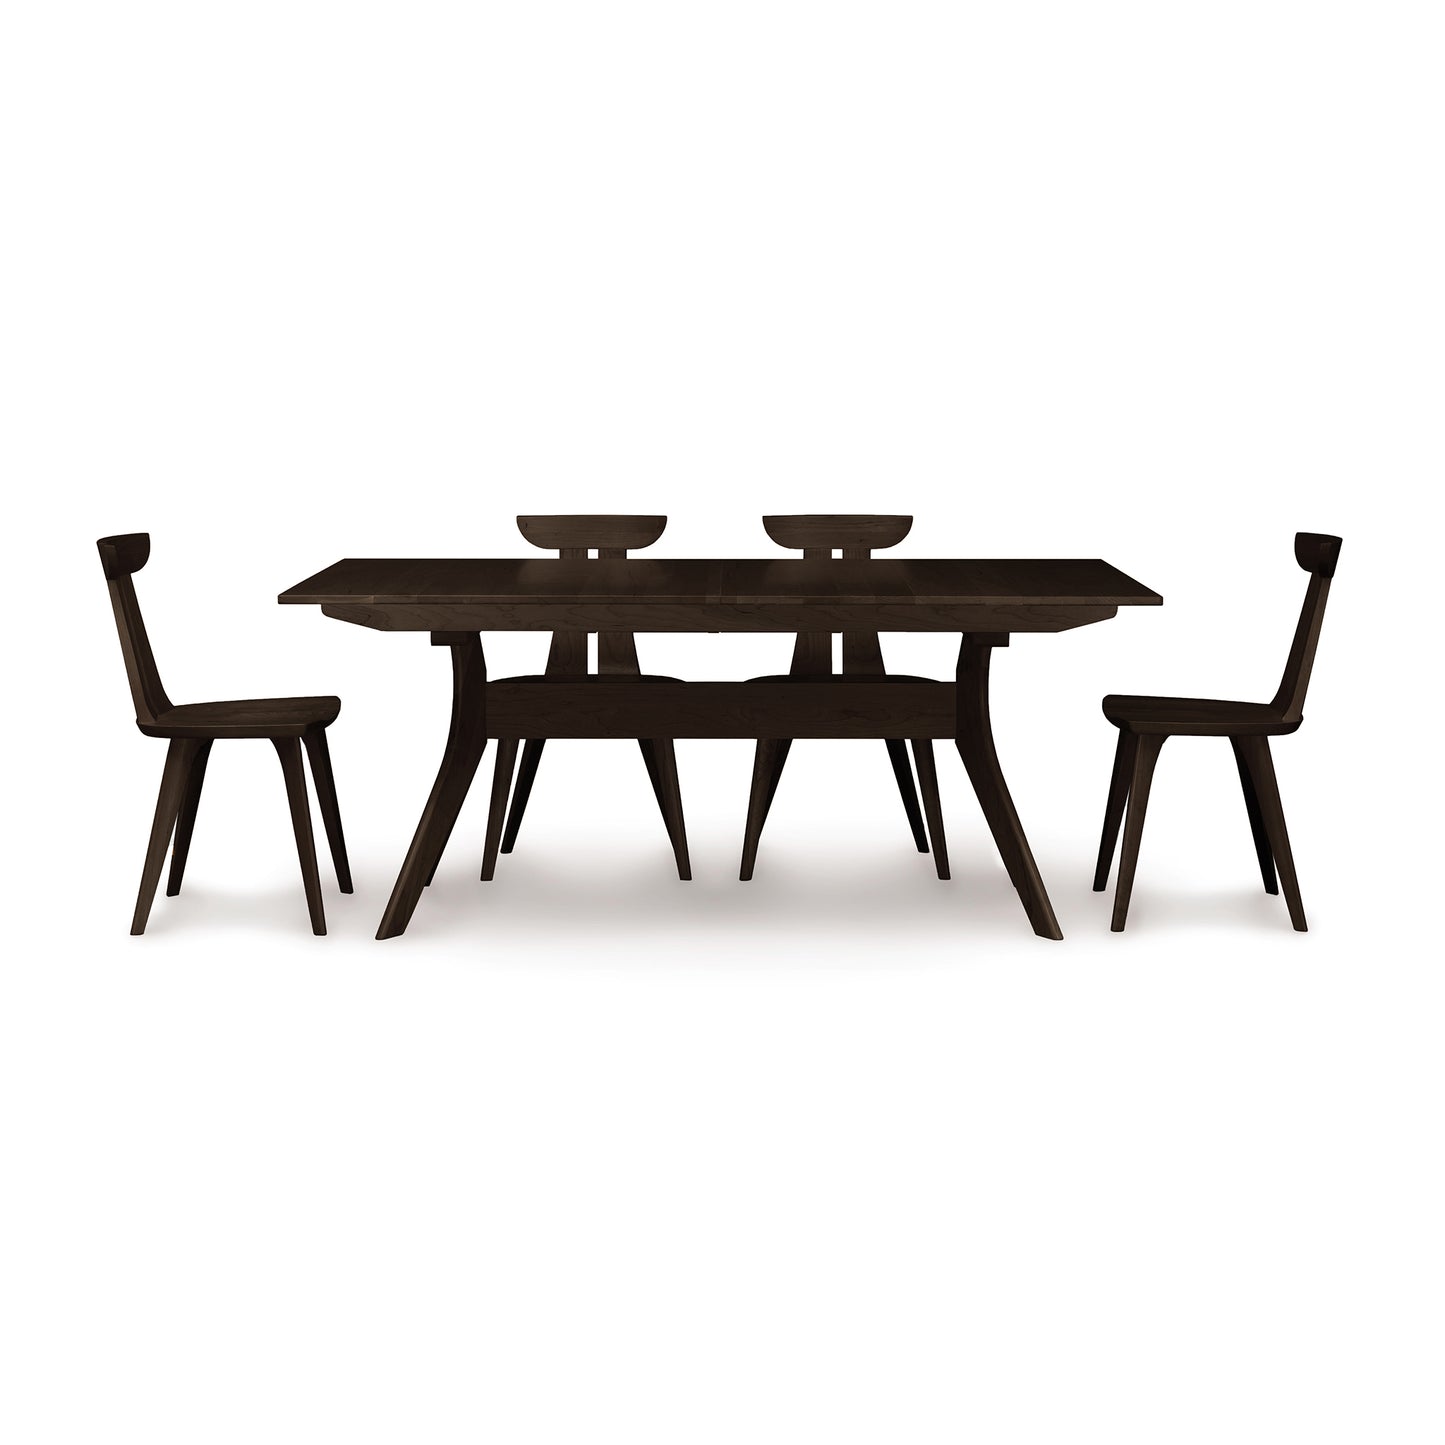 A modern Audrey Extension Dining Table by Copeland Furniture with four matching chairs, isolated on a white background.